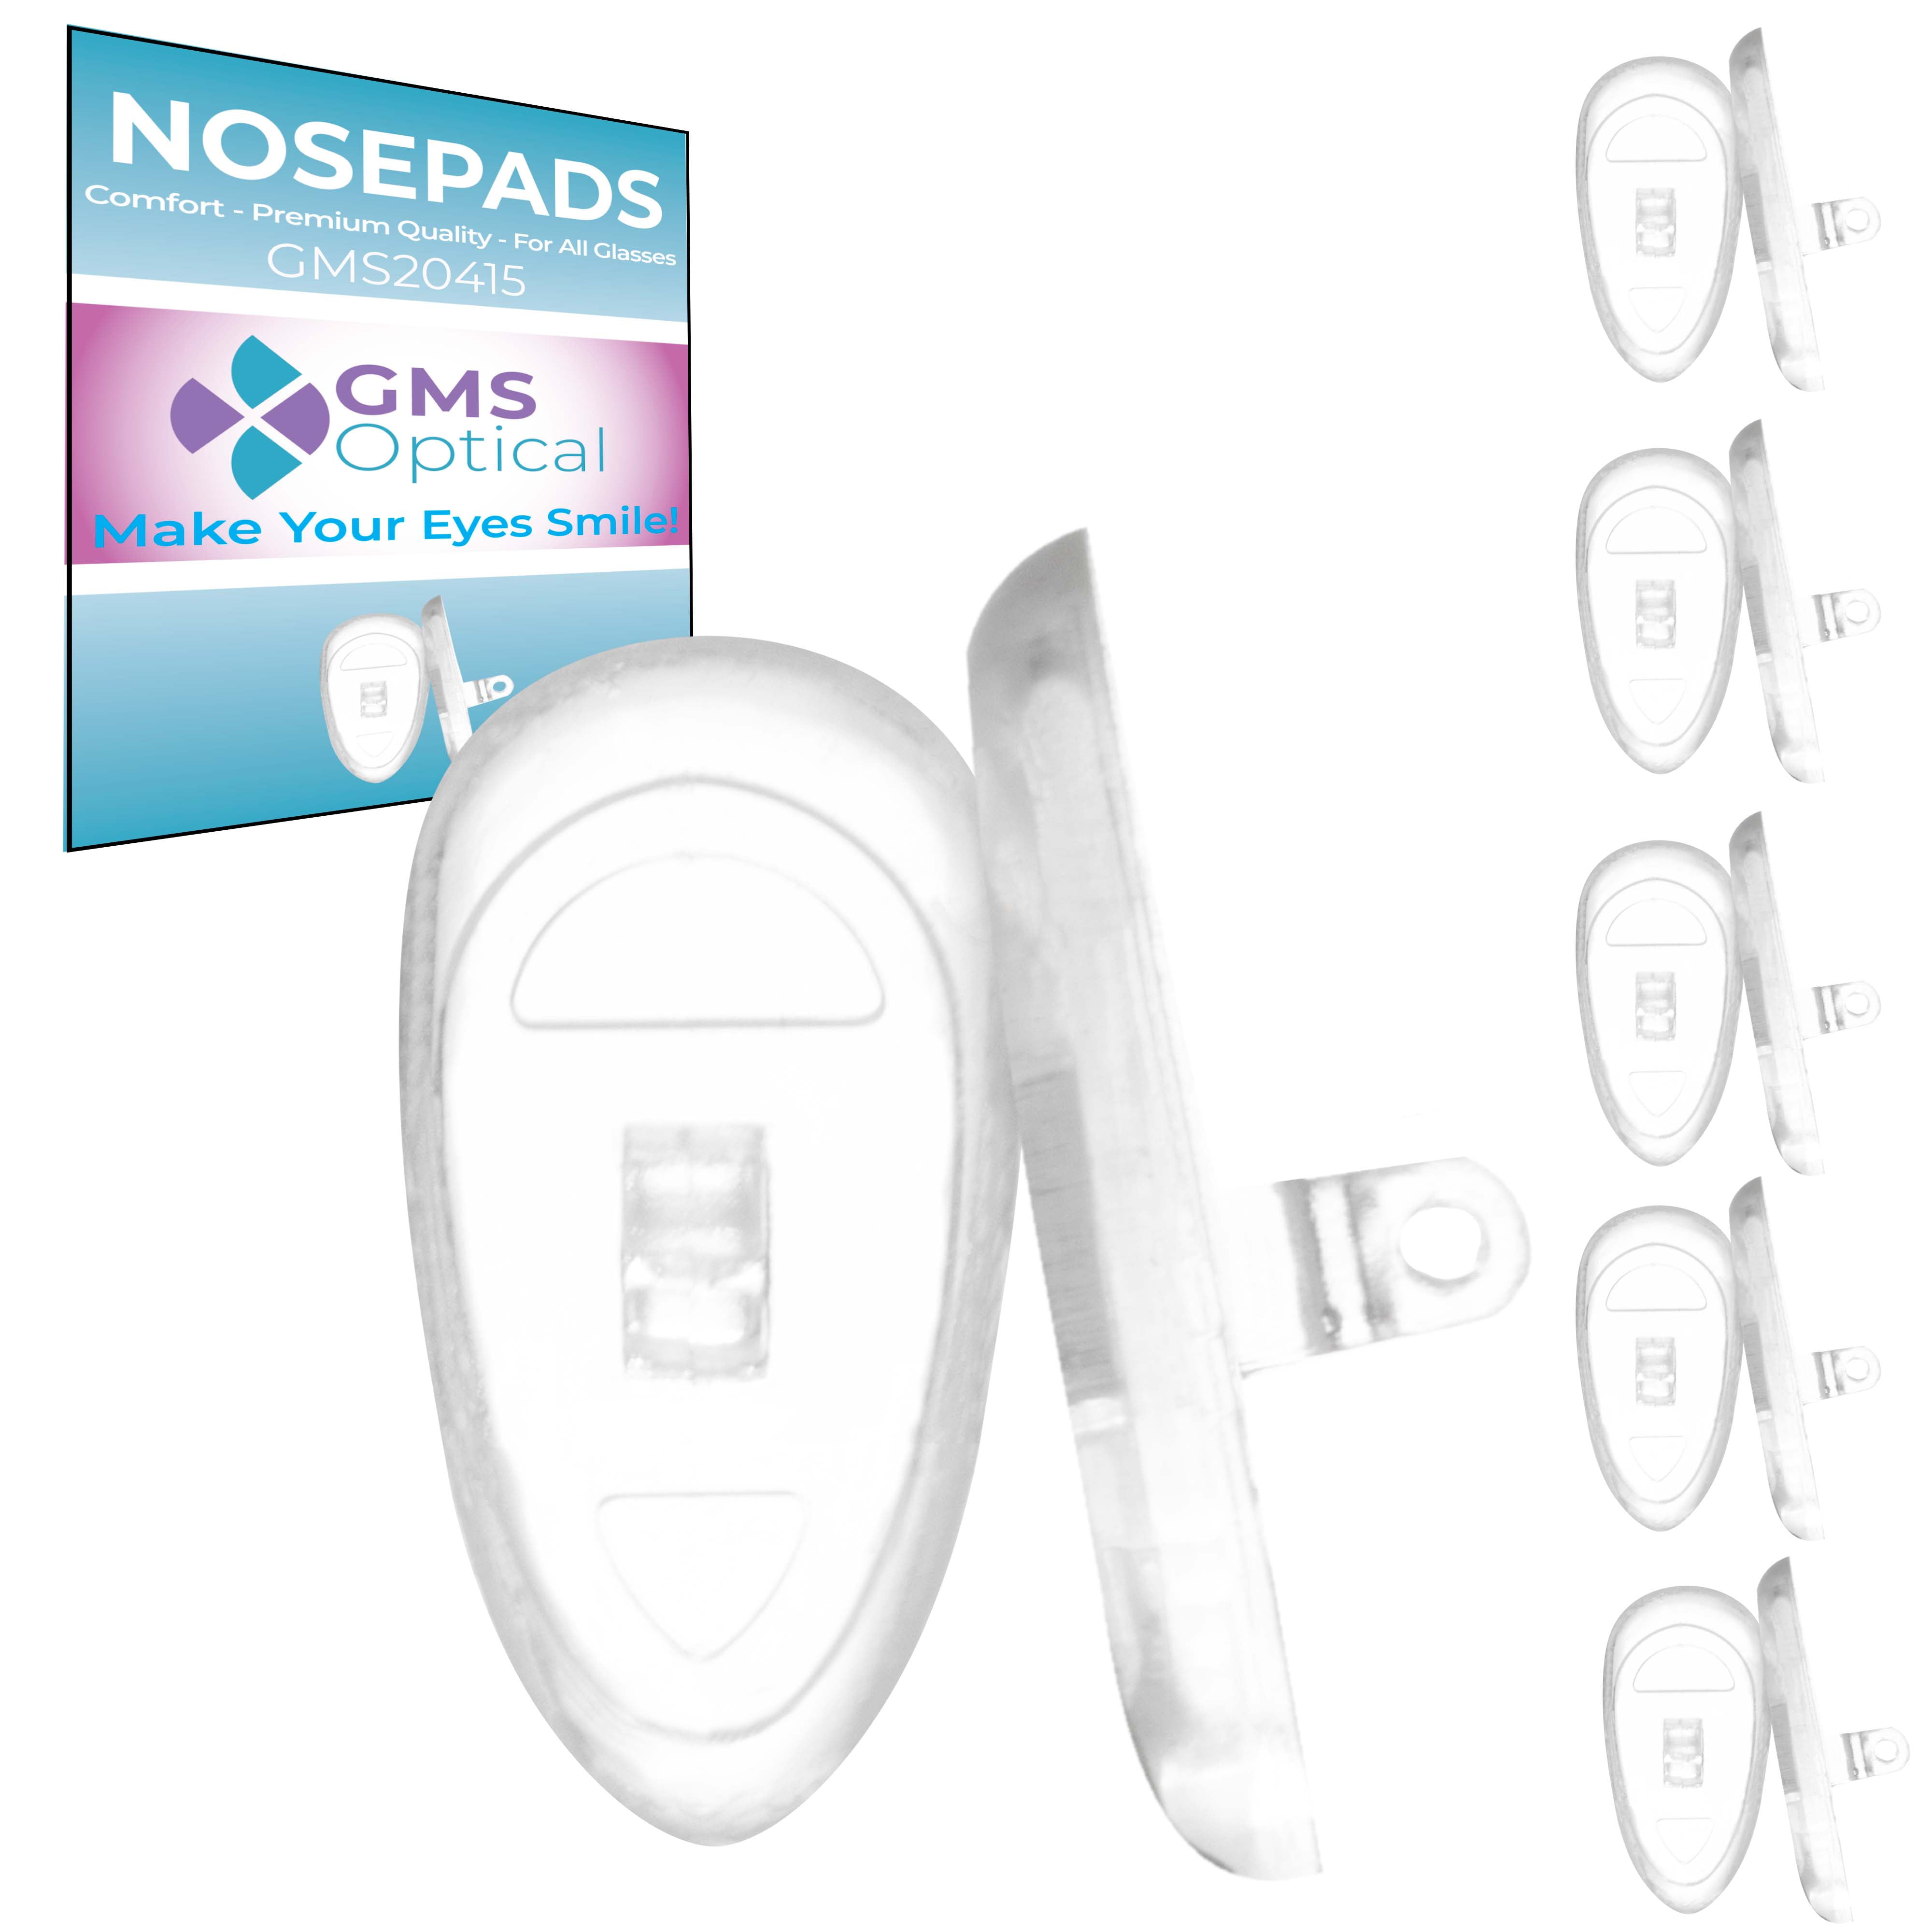 GMS OPTICAL GMS Optical Bridge Strap Screw-in Silicone Nose Pads for  Eyeglasses (Pack of 4) One of Each Size - 18mm, 22mm, 28mm, 32mm